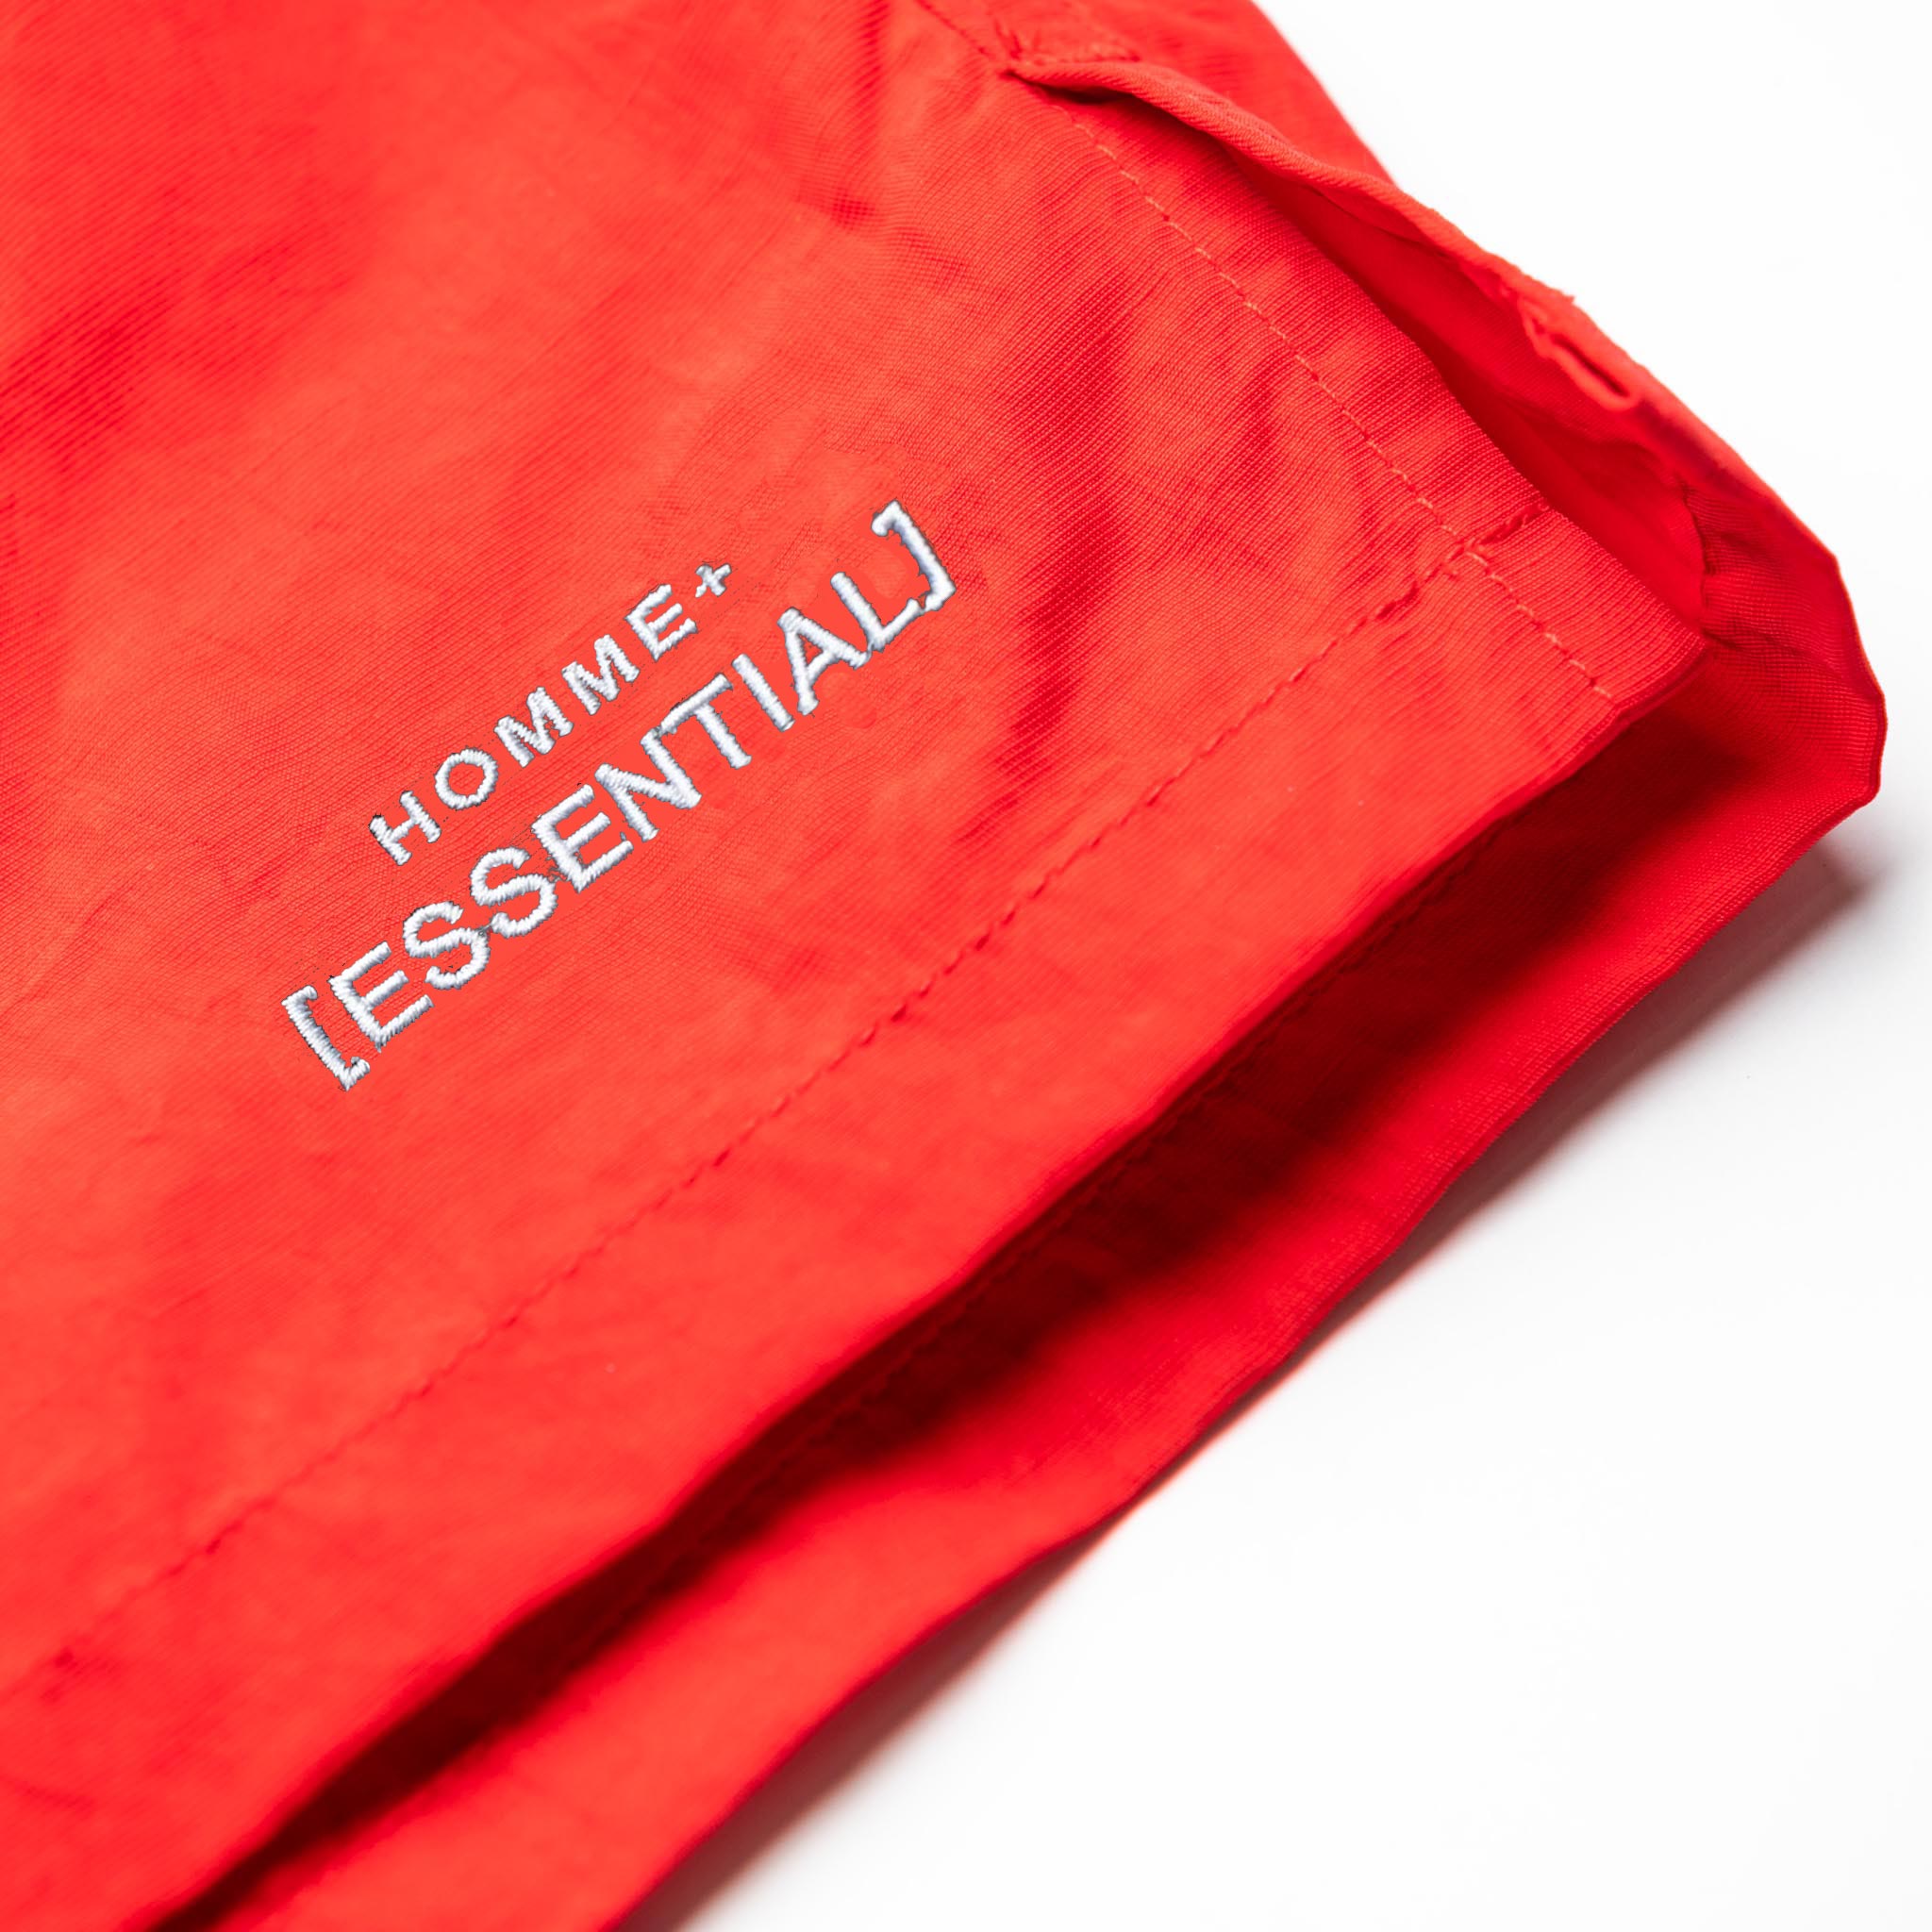 HOMME+ 'ESSENTIAL' Swim Shorts Red